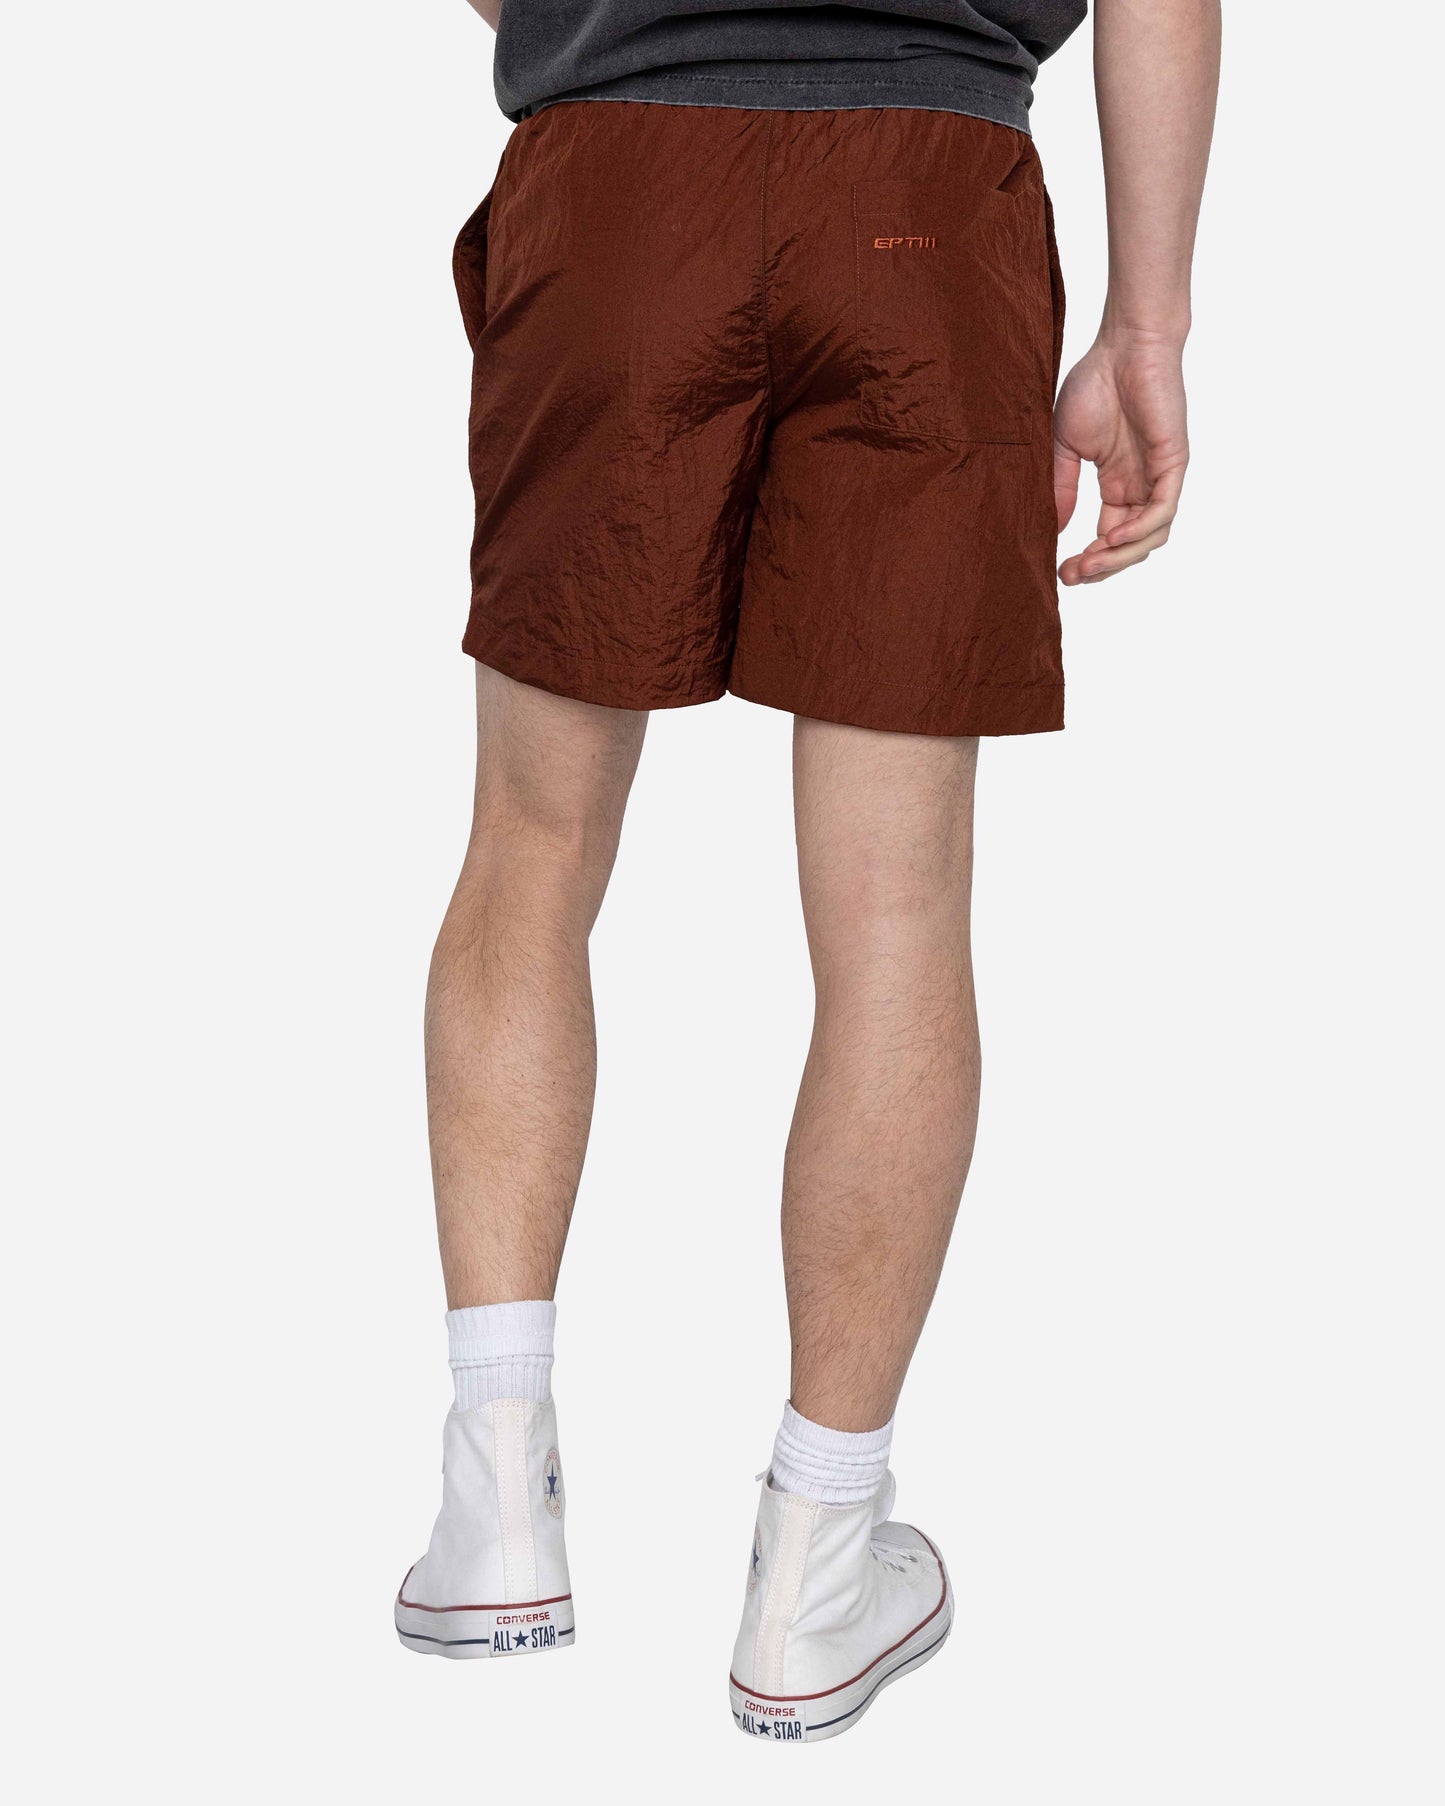 EPTM ALLOY SHORTS-BROWN